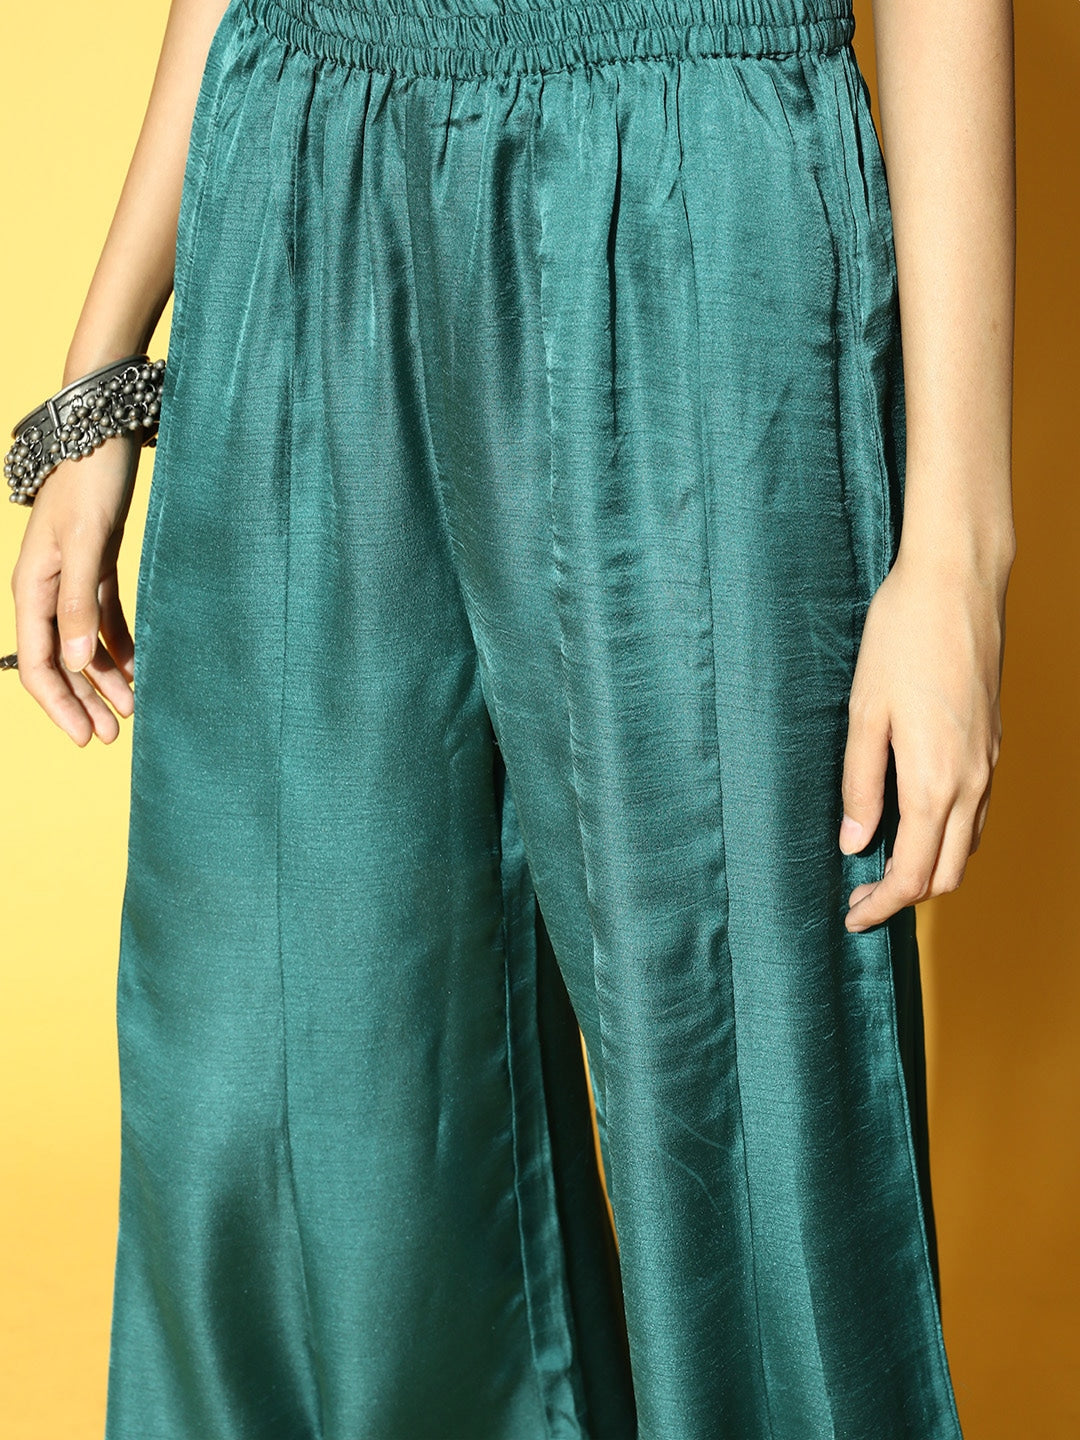 Teal Green & Golden Striped Co-Ords-Yufta Store-9630CRDTGXS